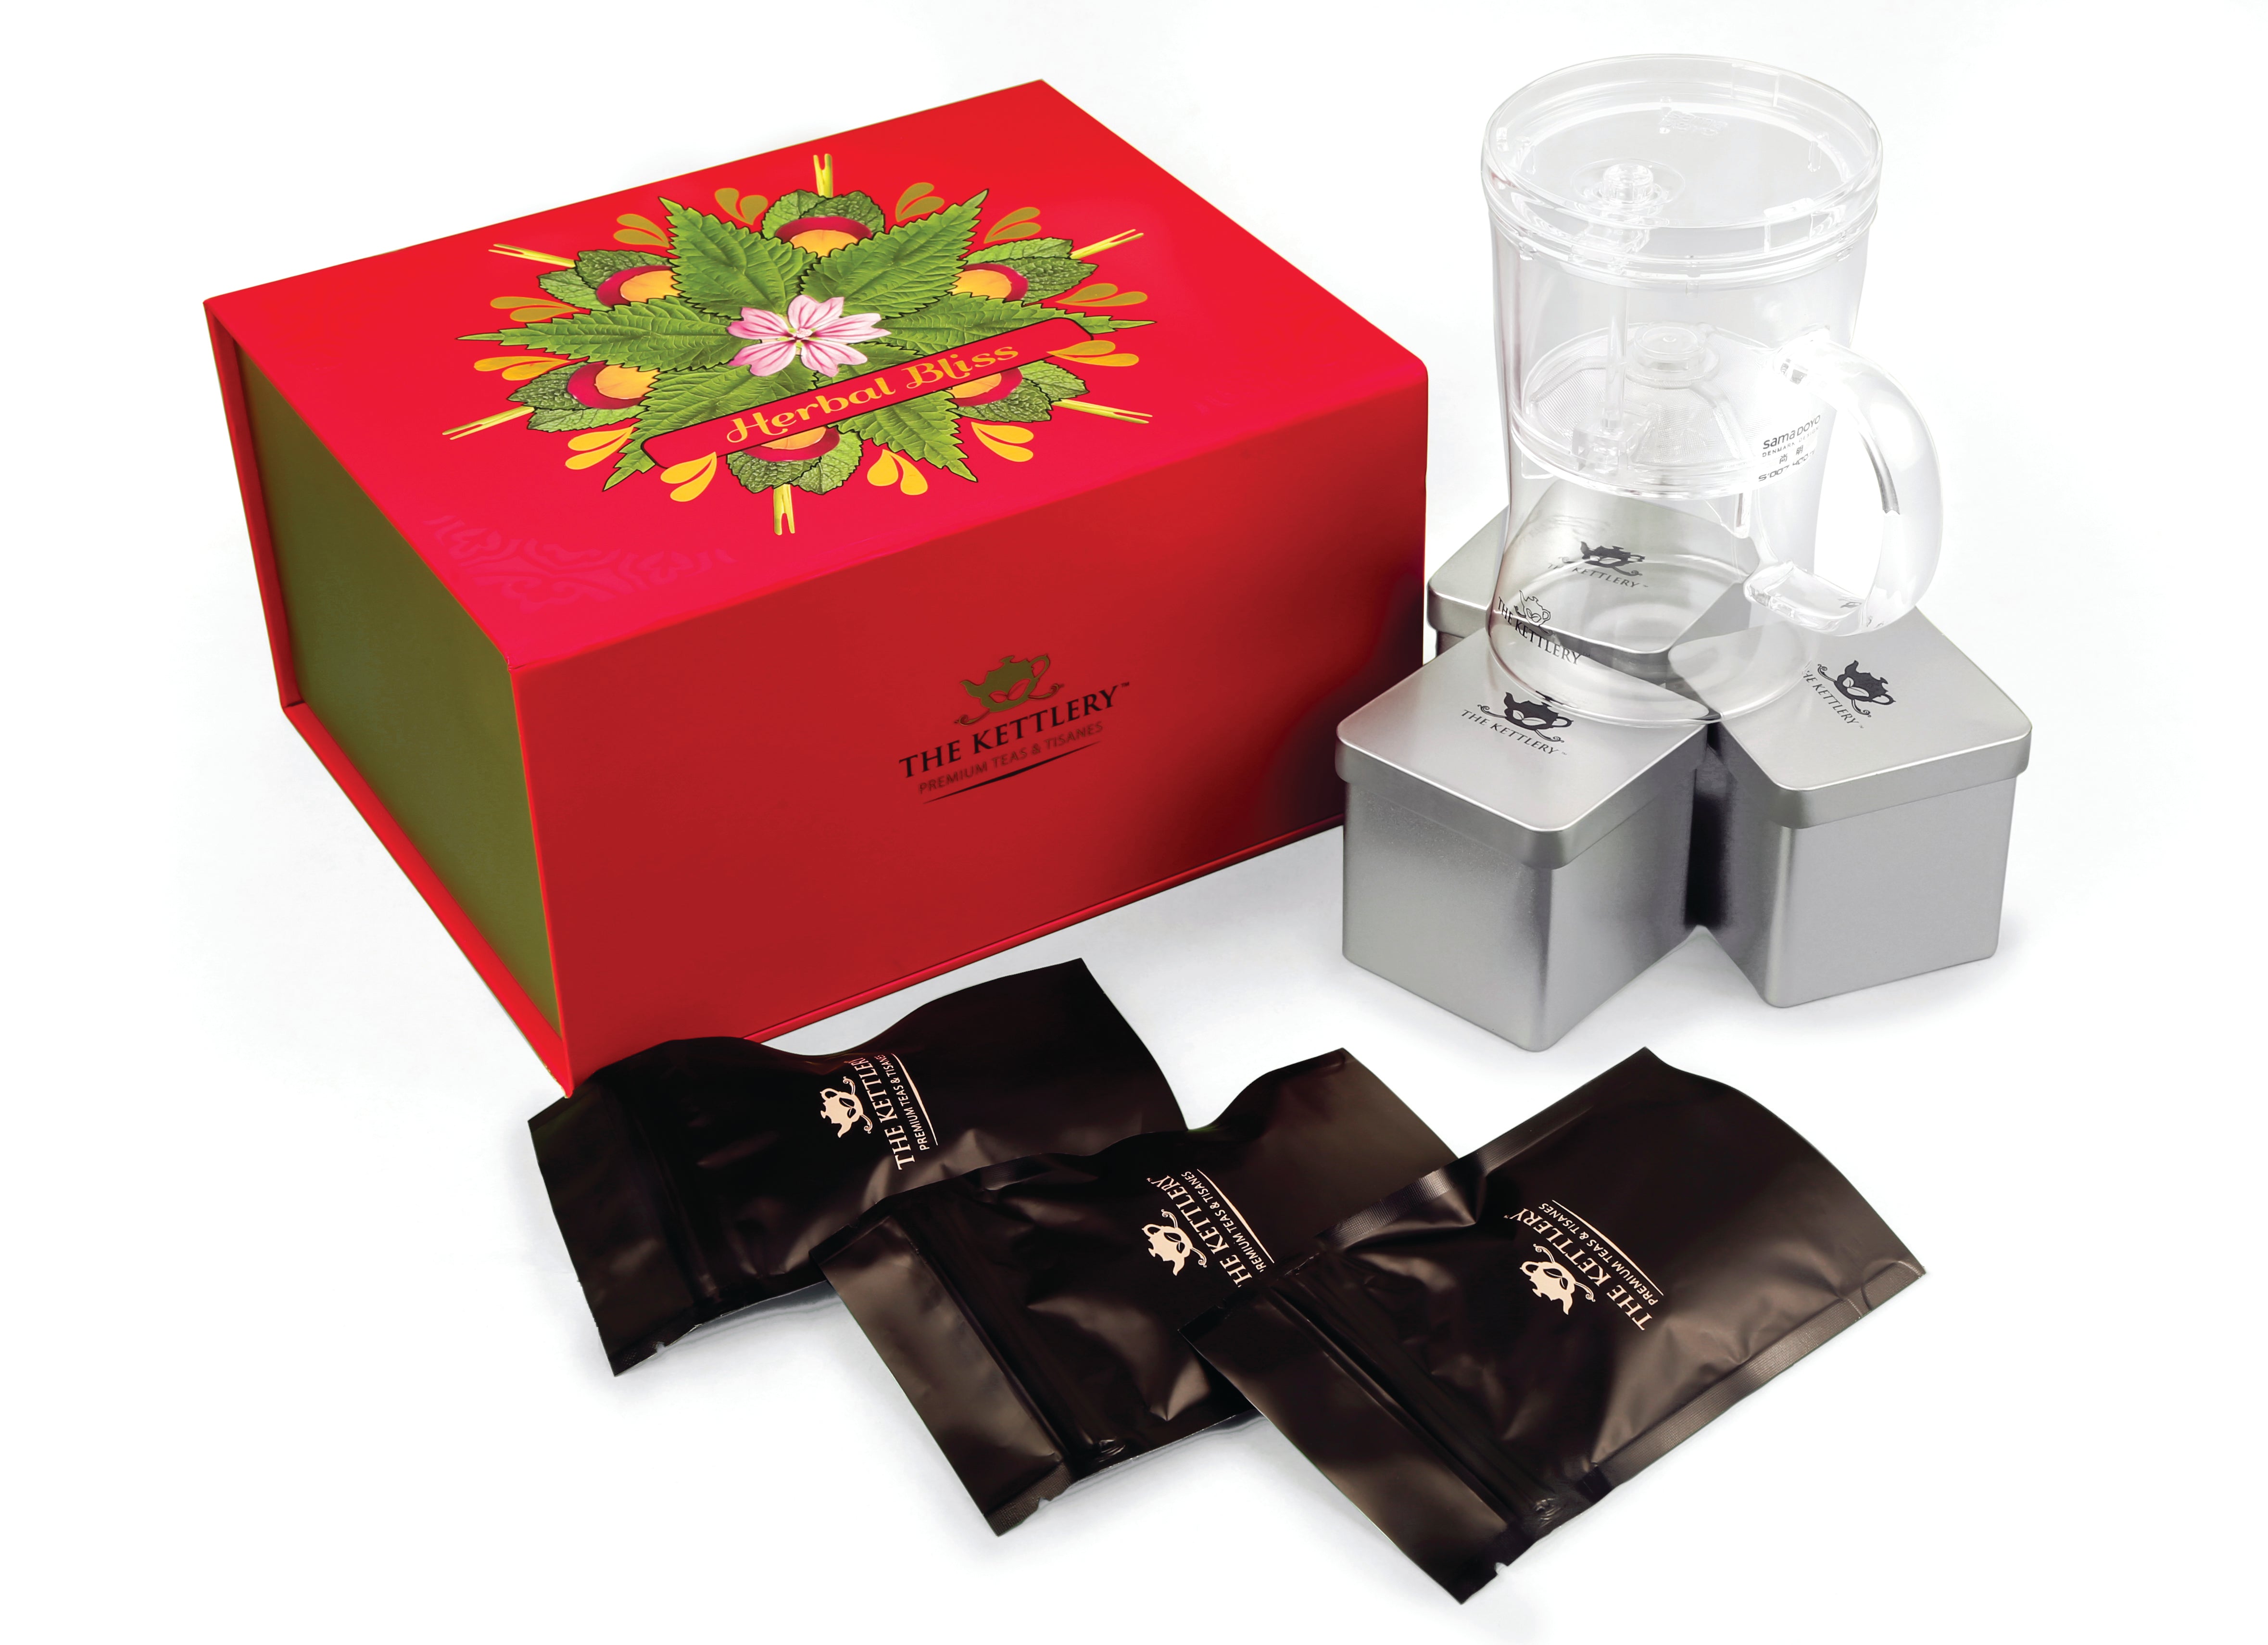 The Kettlery Herbal Bliss Tea Set | Premium Tea Gifts | Assorted Gift Box with 3 Detox Herbal Blends | Herbal Tea Gifts | Premium Teas & Tisanes